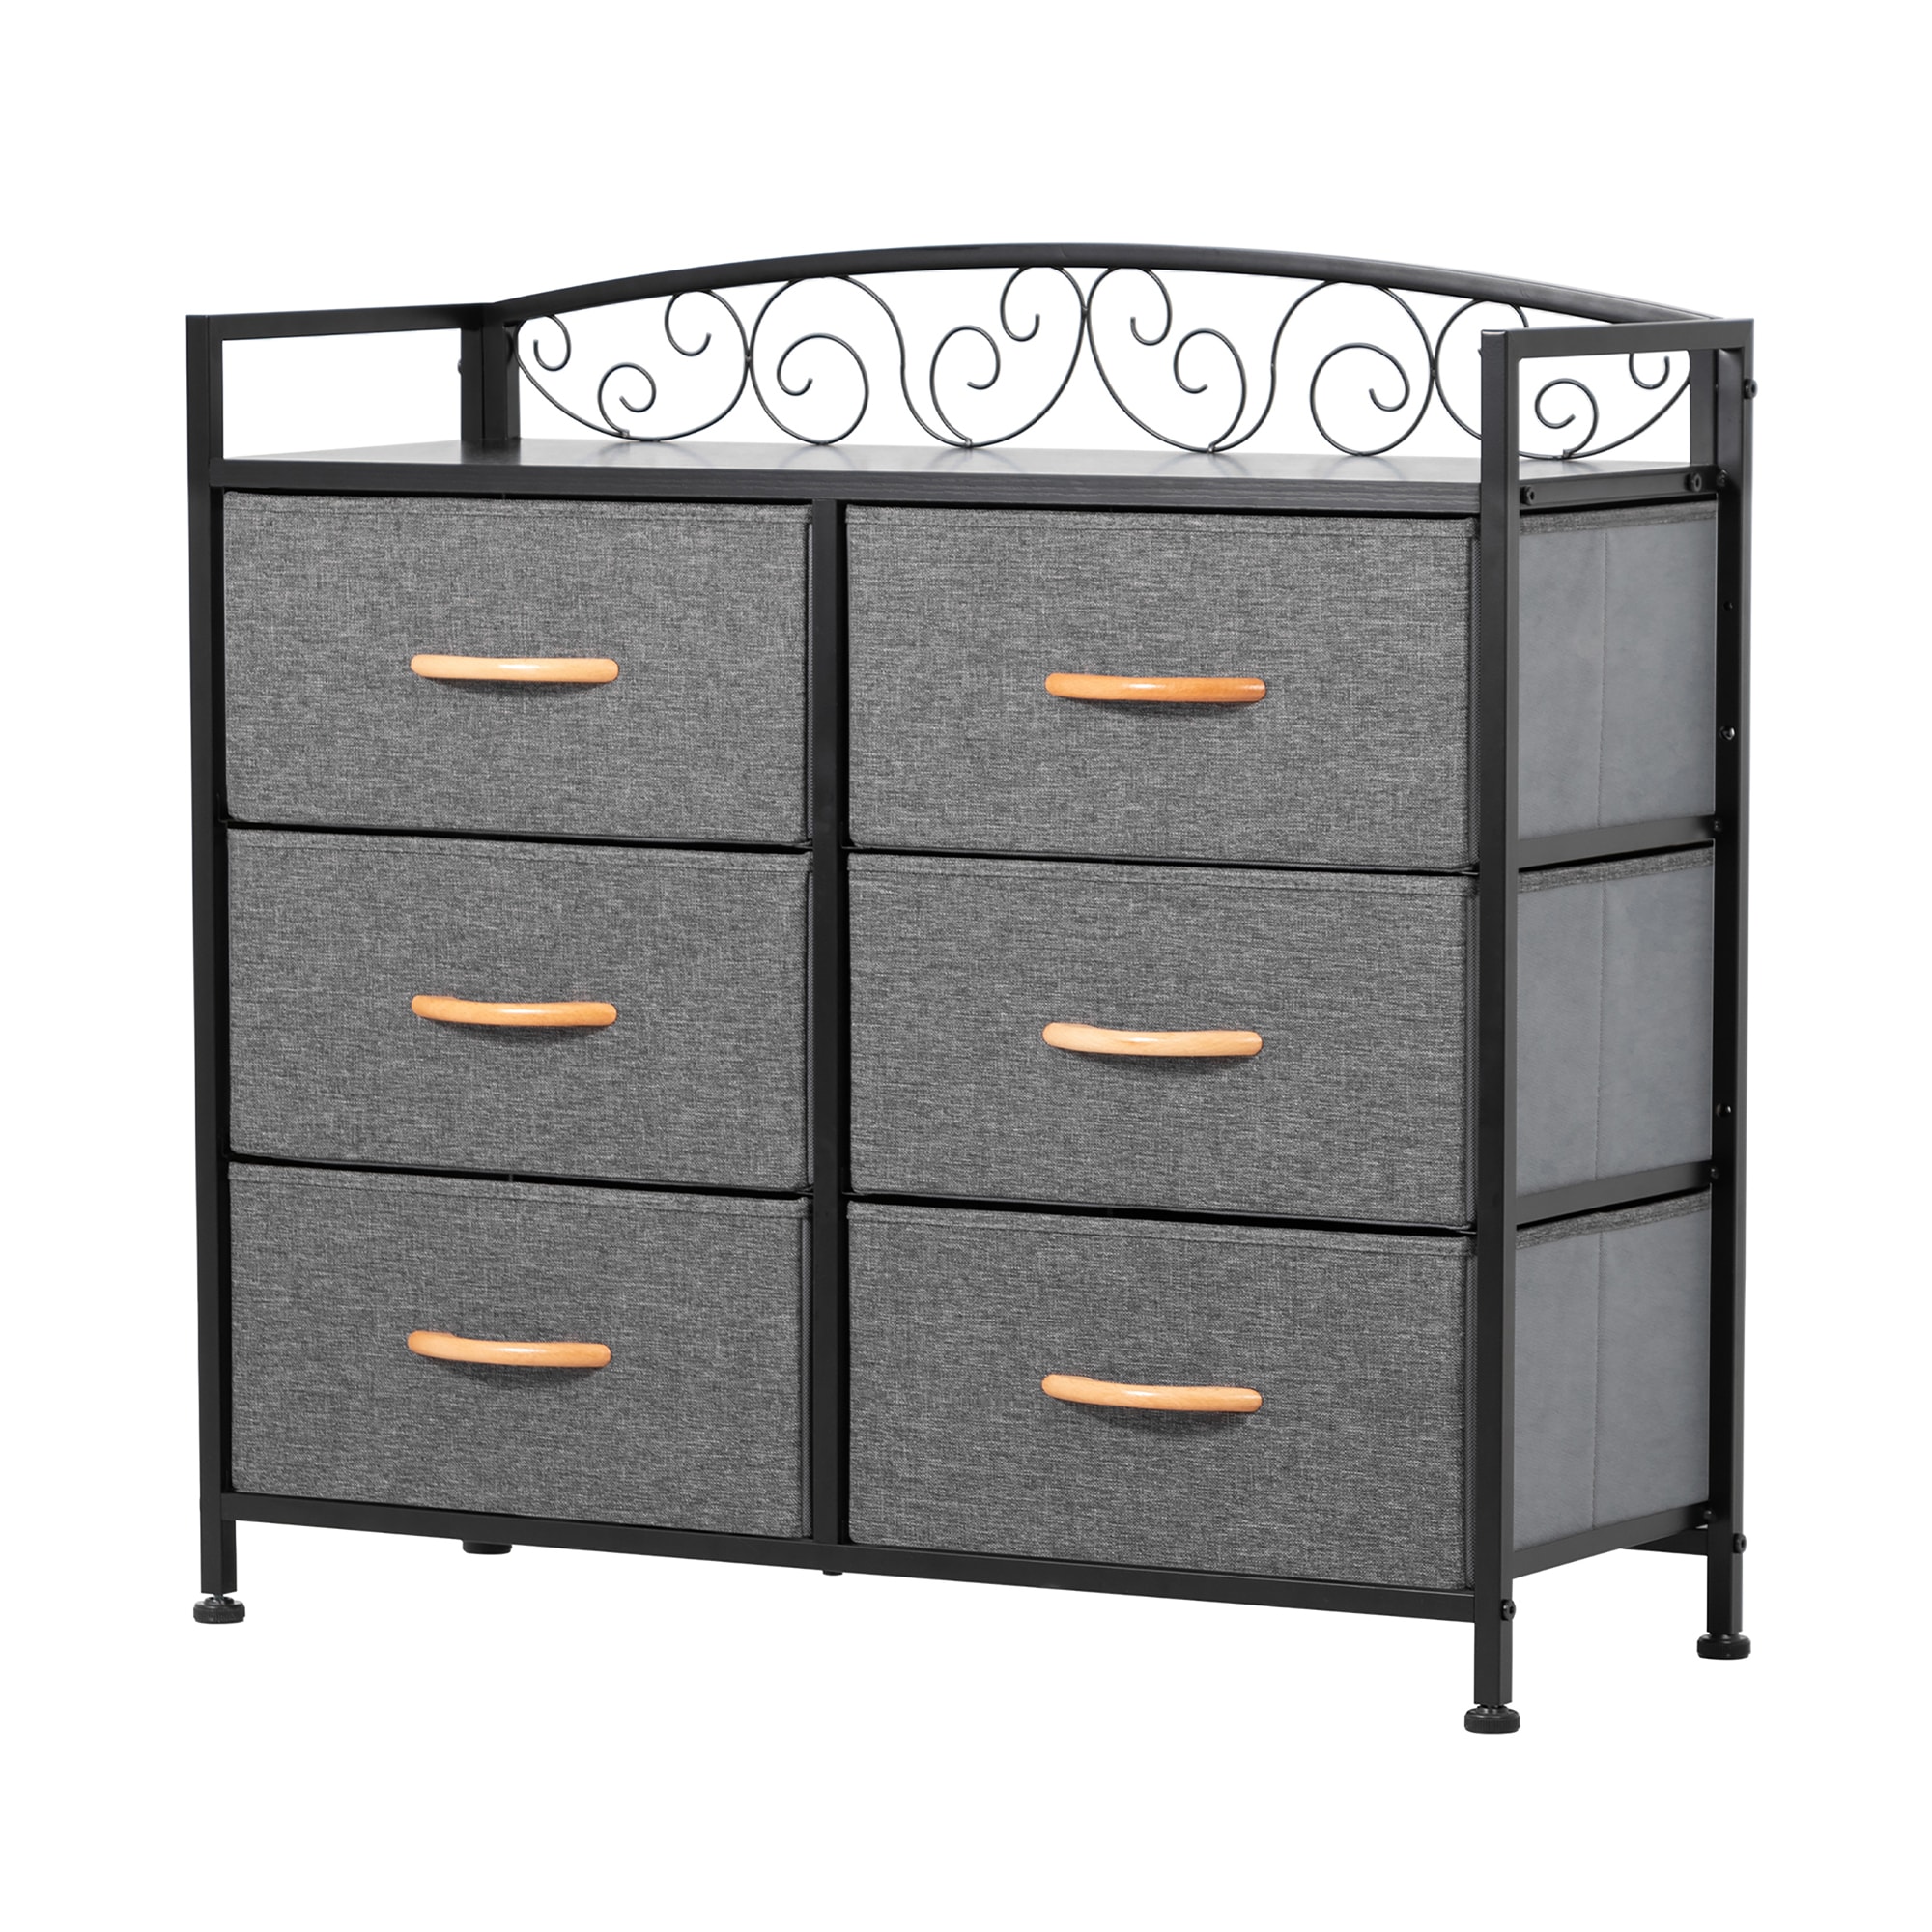 Tall Dresser for Bedroom, Vertical Storage Organizer Tower with 7